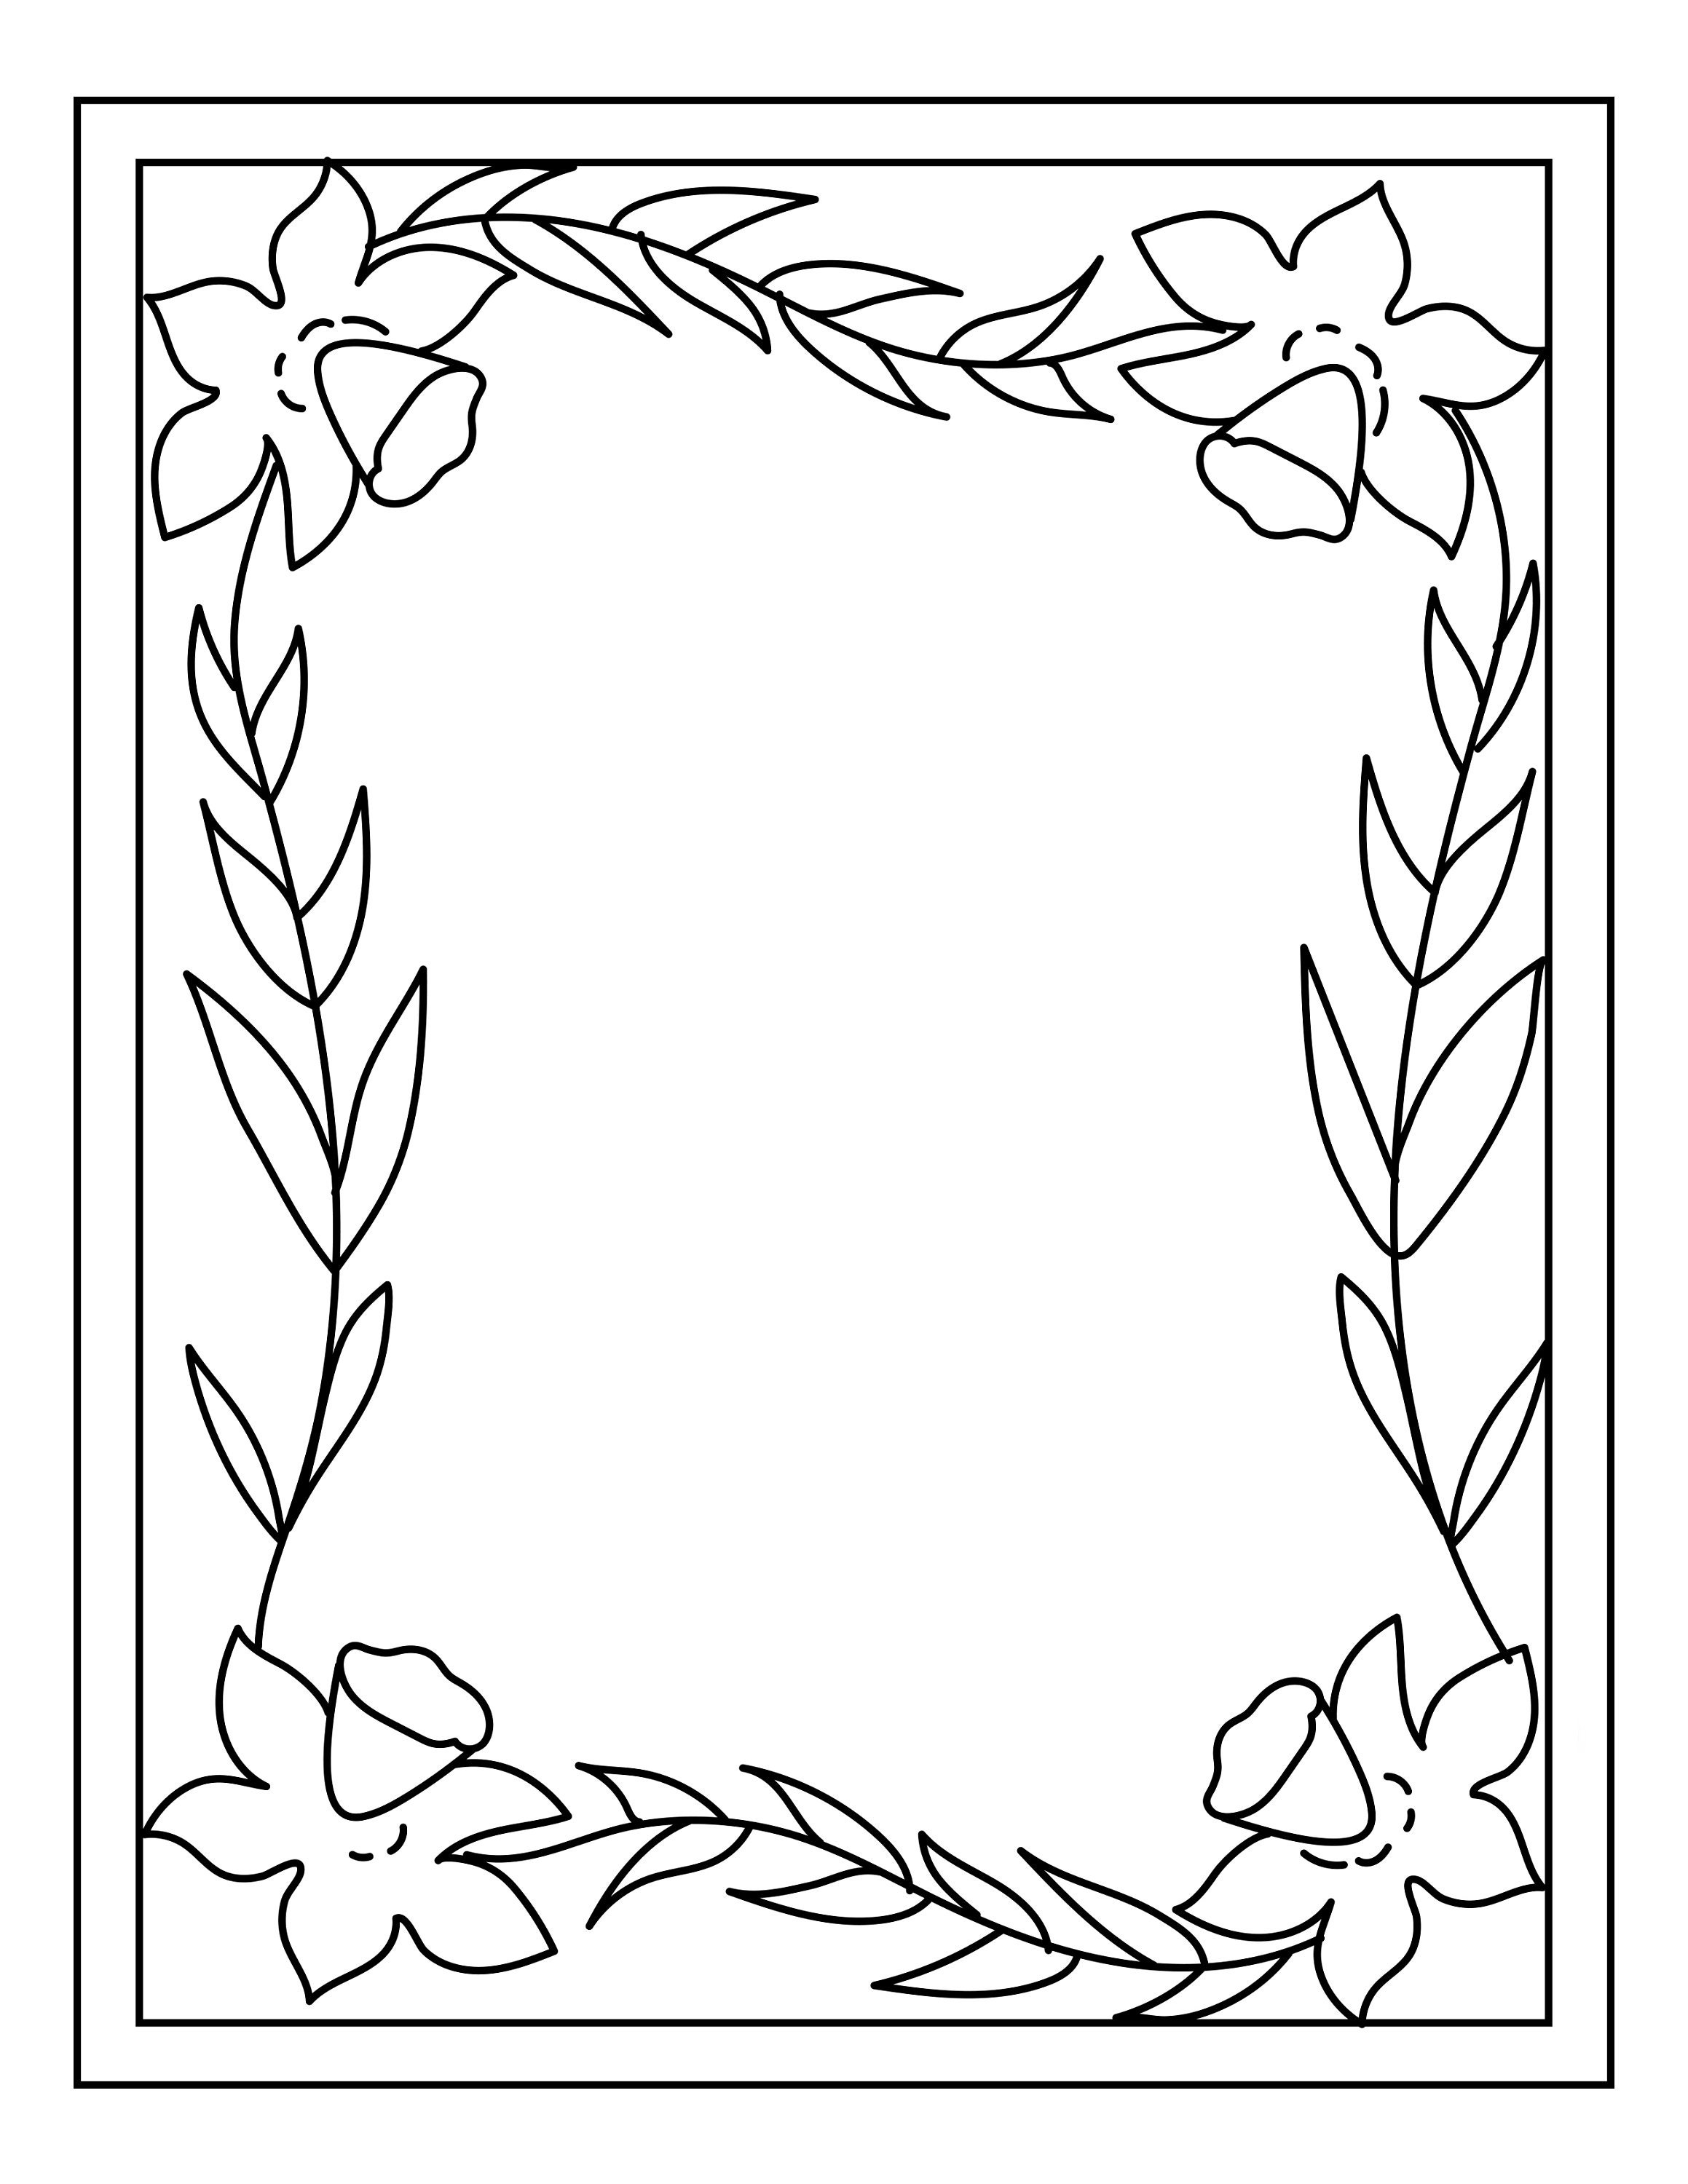 Printable flower border coloring pages download now